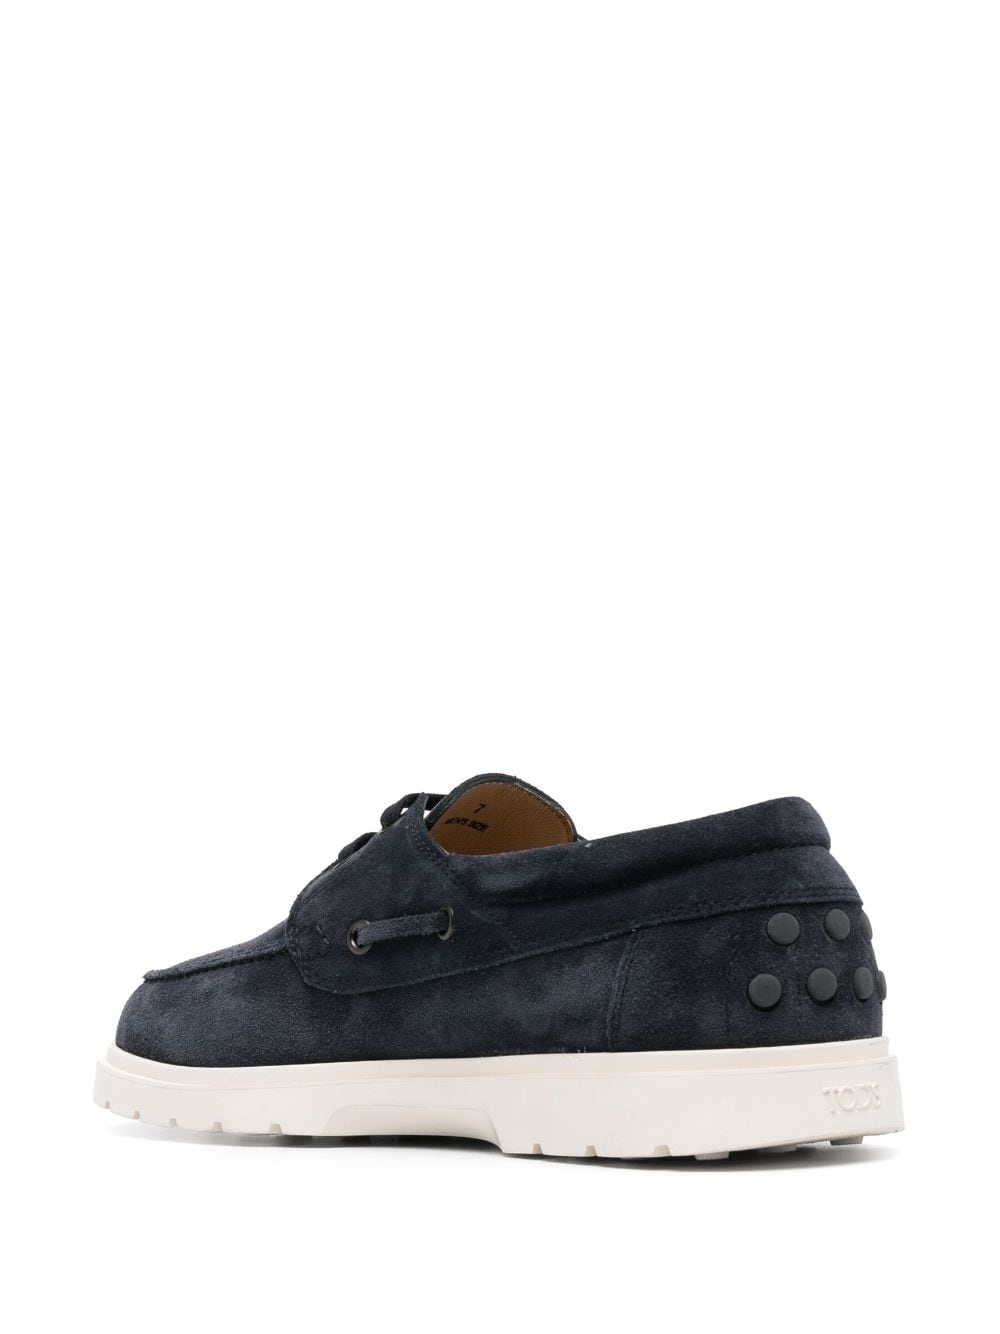 suede boat shoes - 3